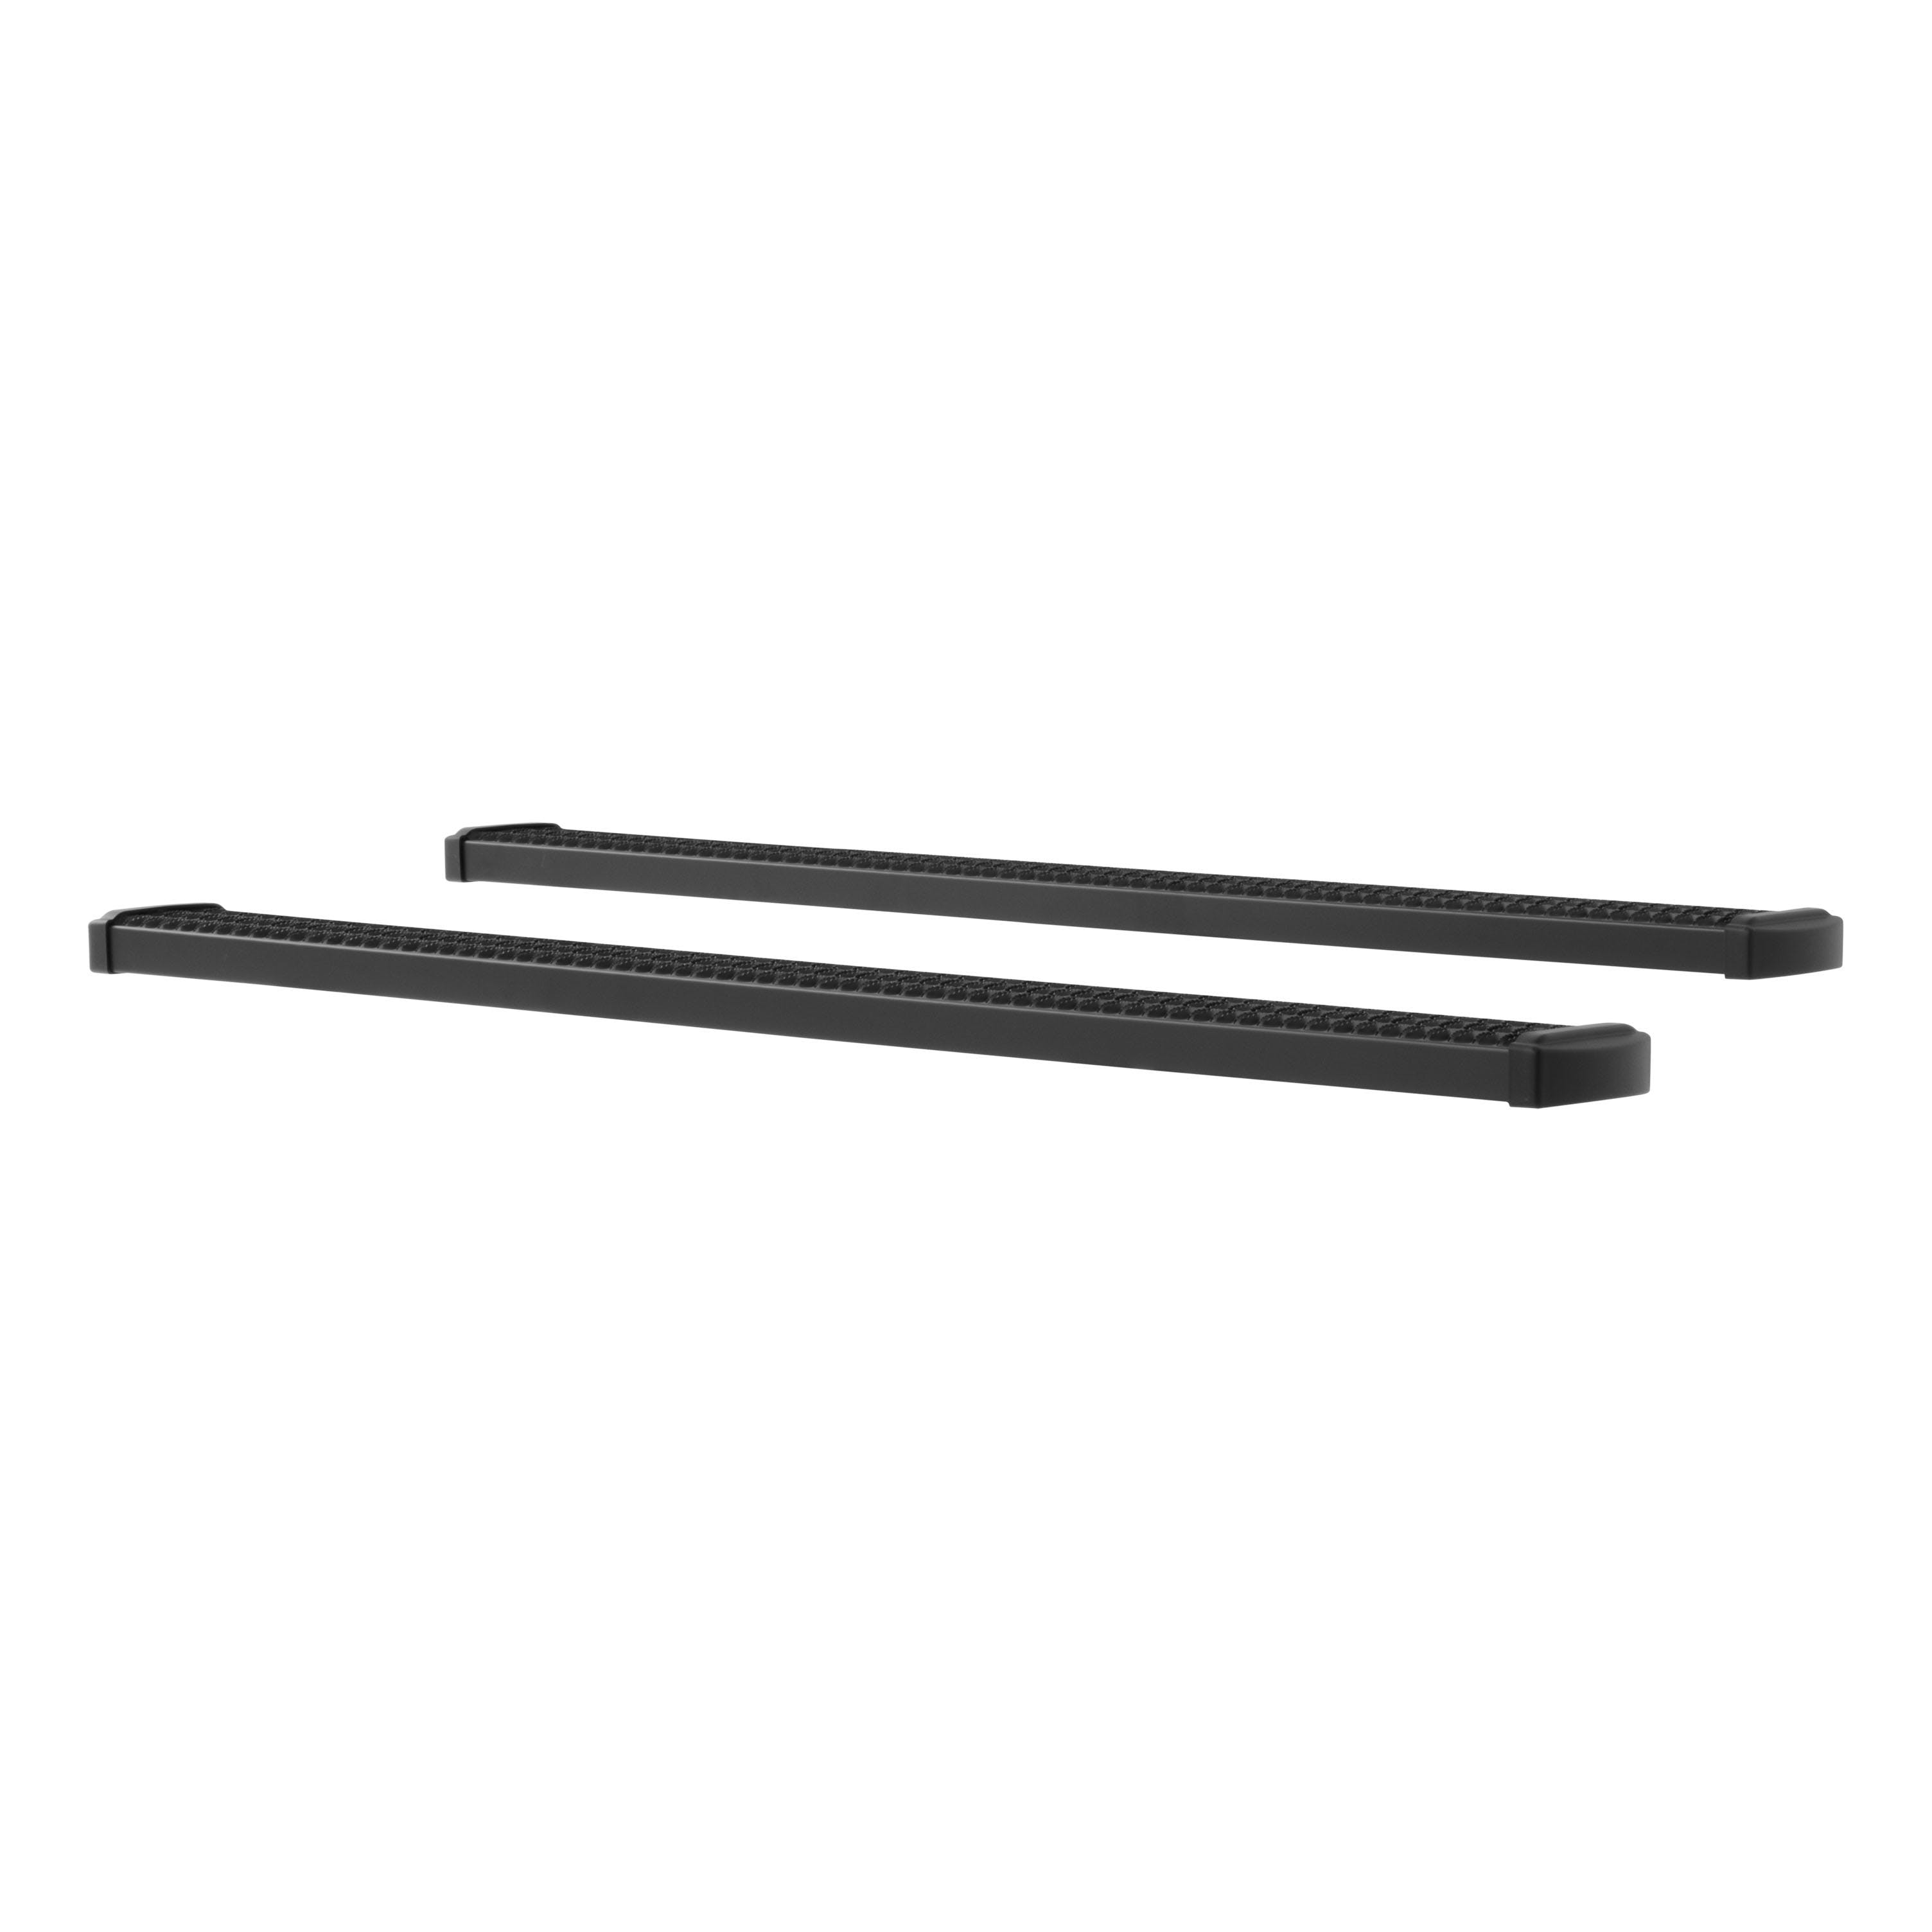 LUVERNE 415078-401443 Grip Step 7 inch Running Boards